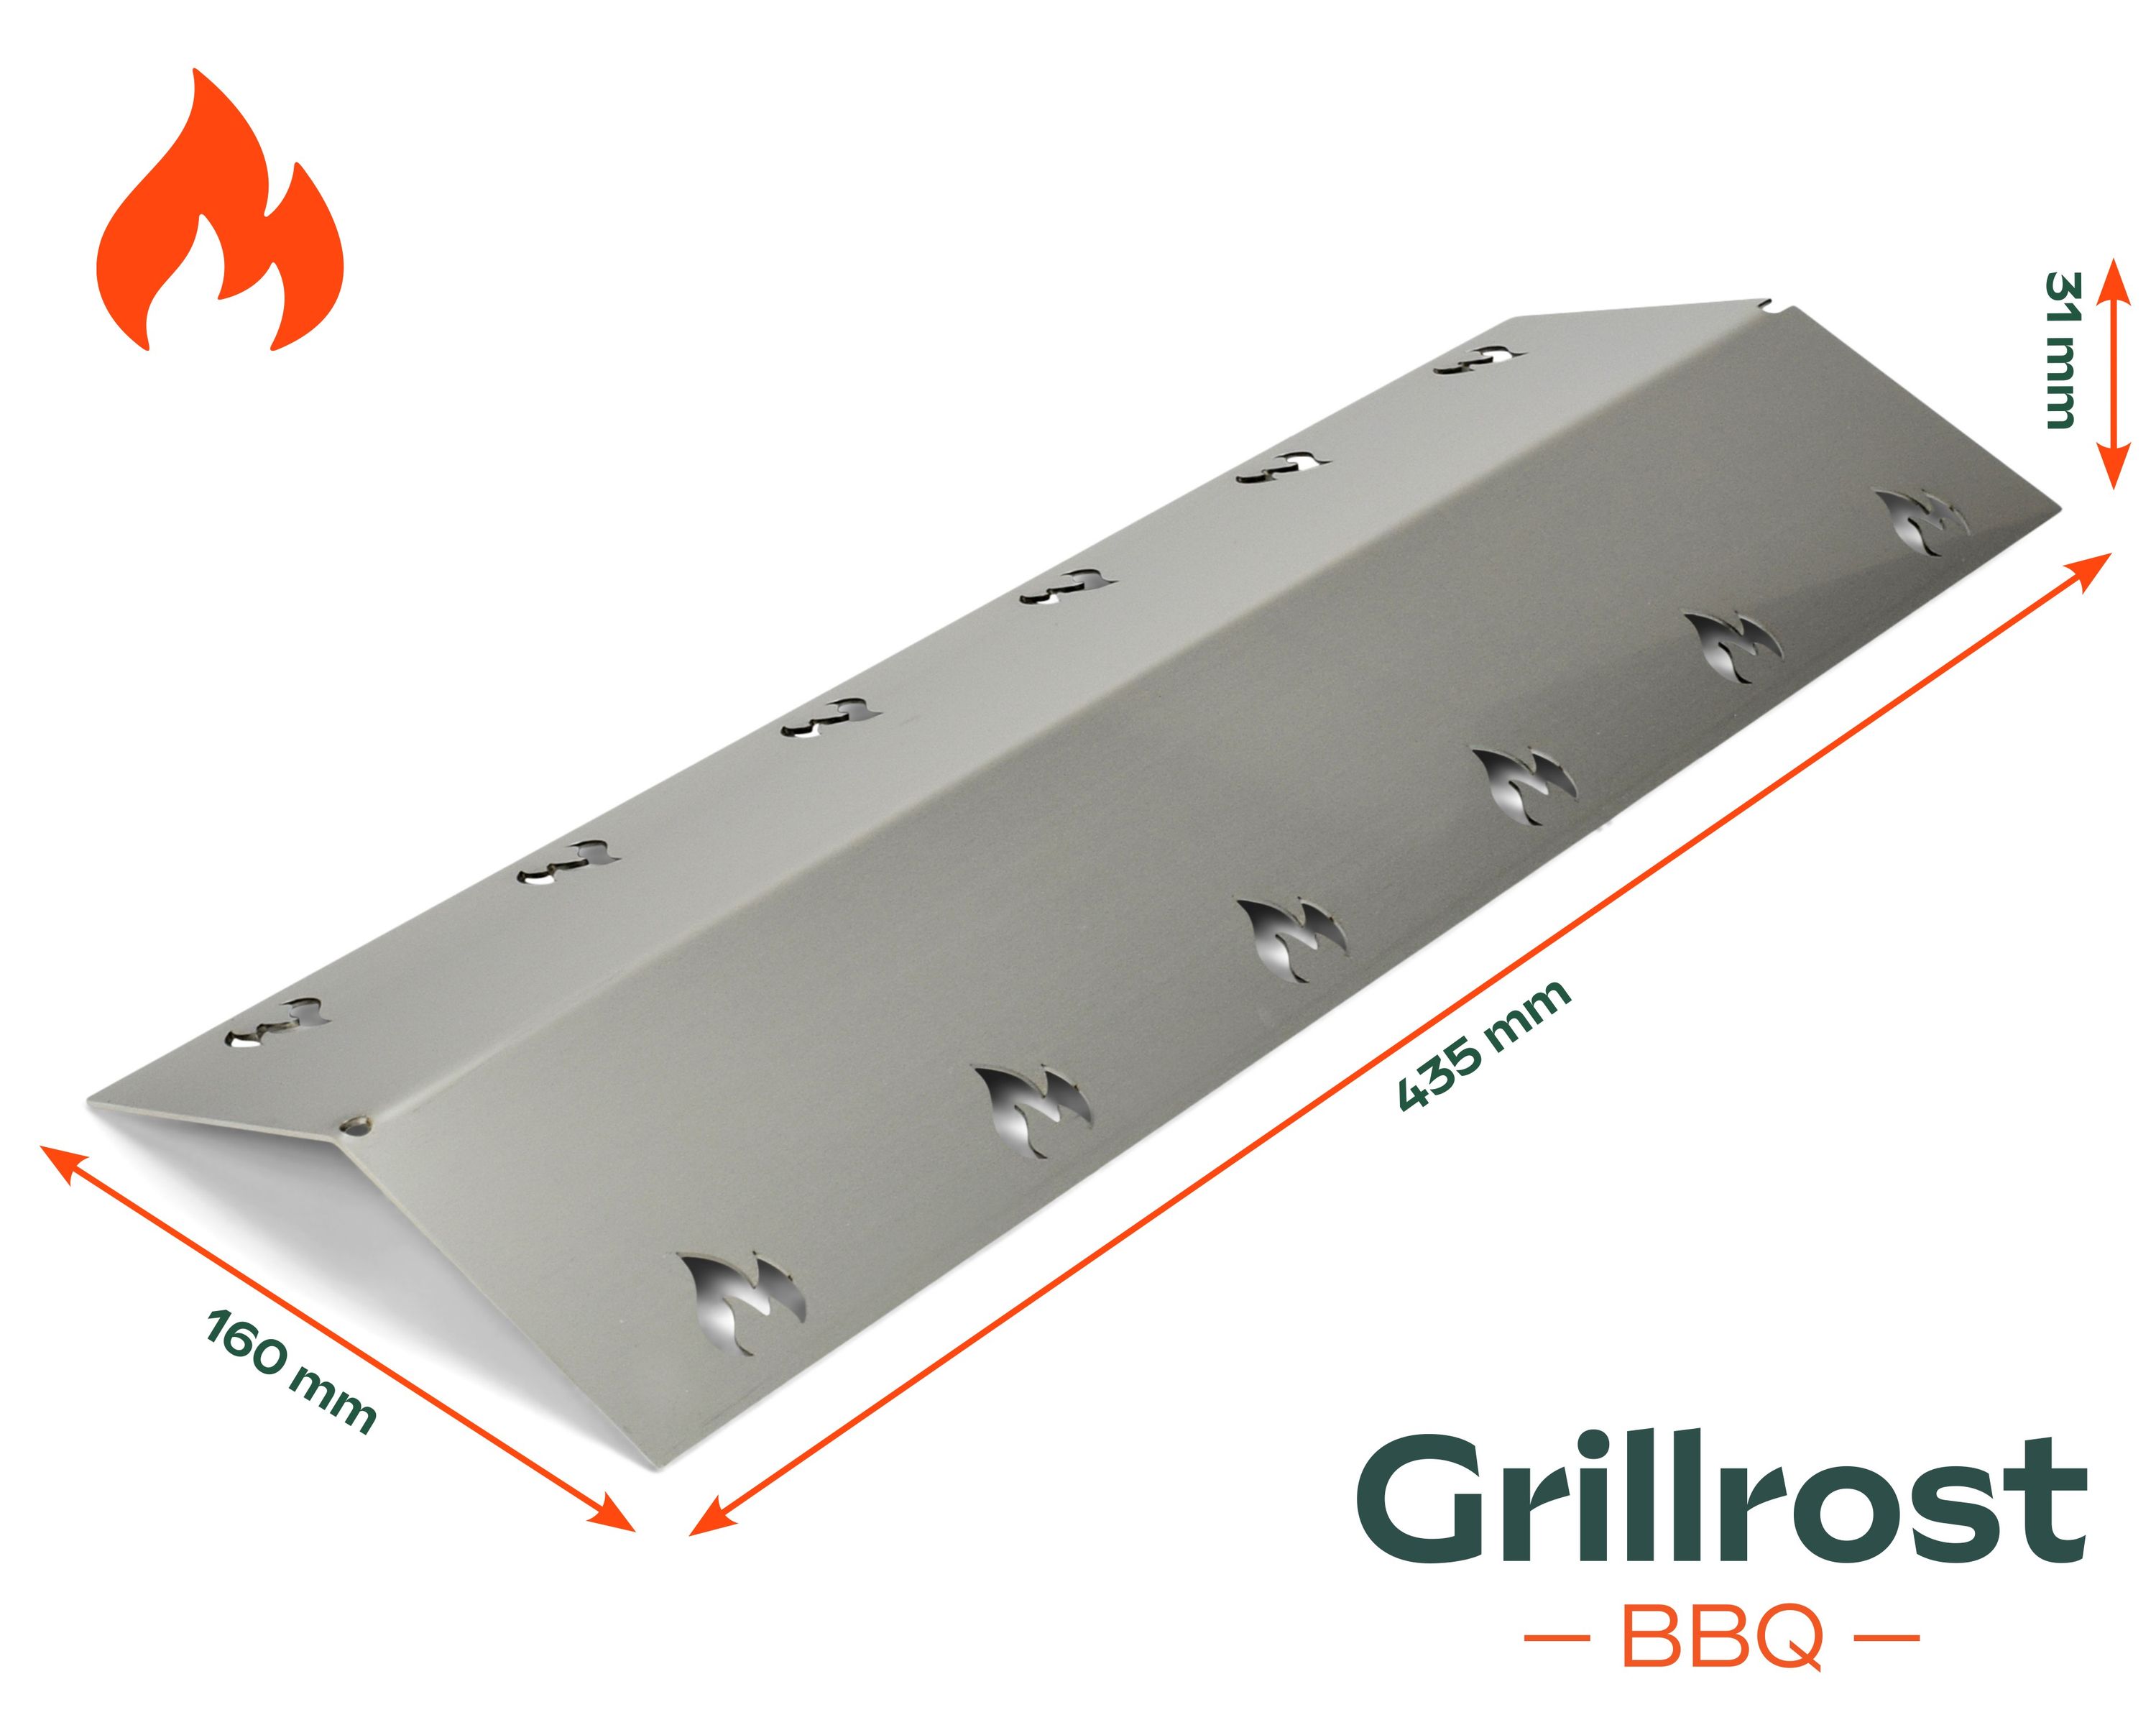 Stainless steel burner cover 43.5 x 16 cm Replacement aroma rail outlives your barbecue